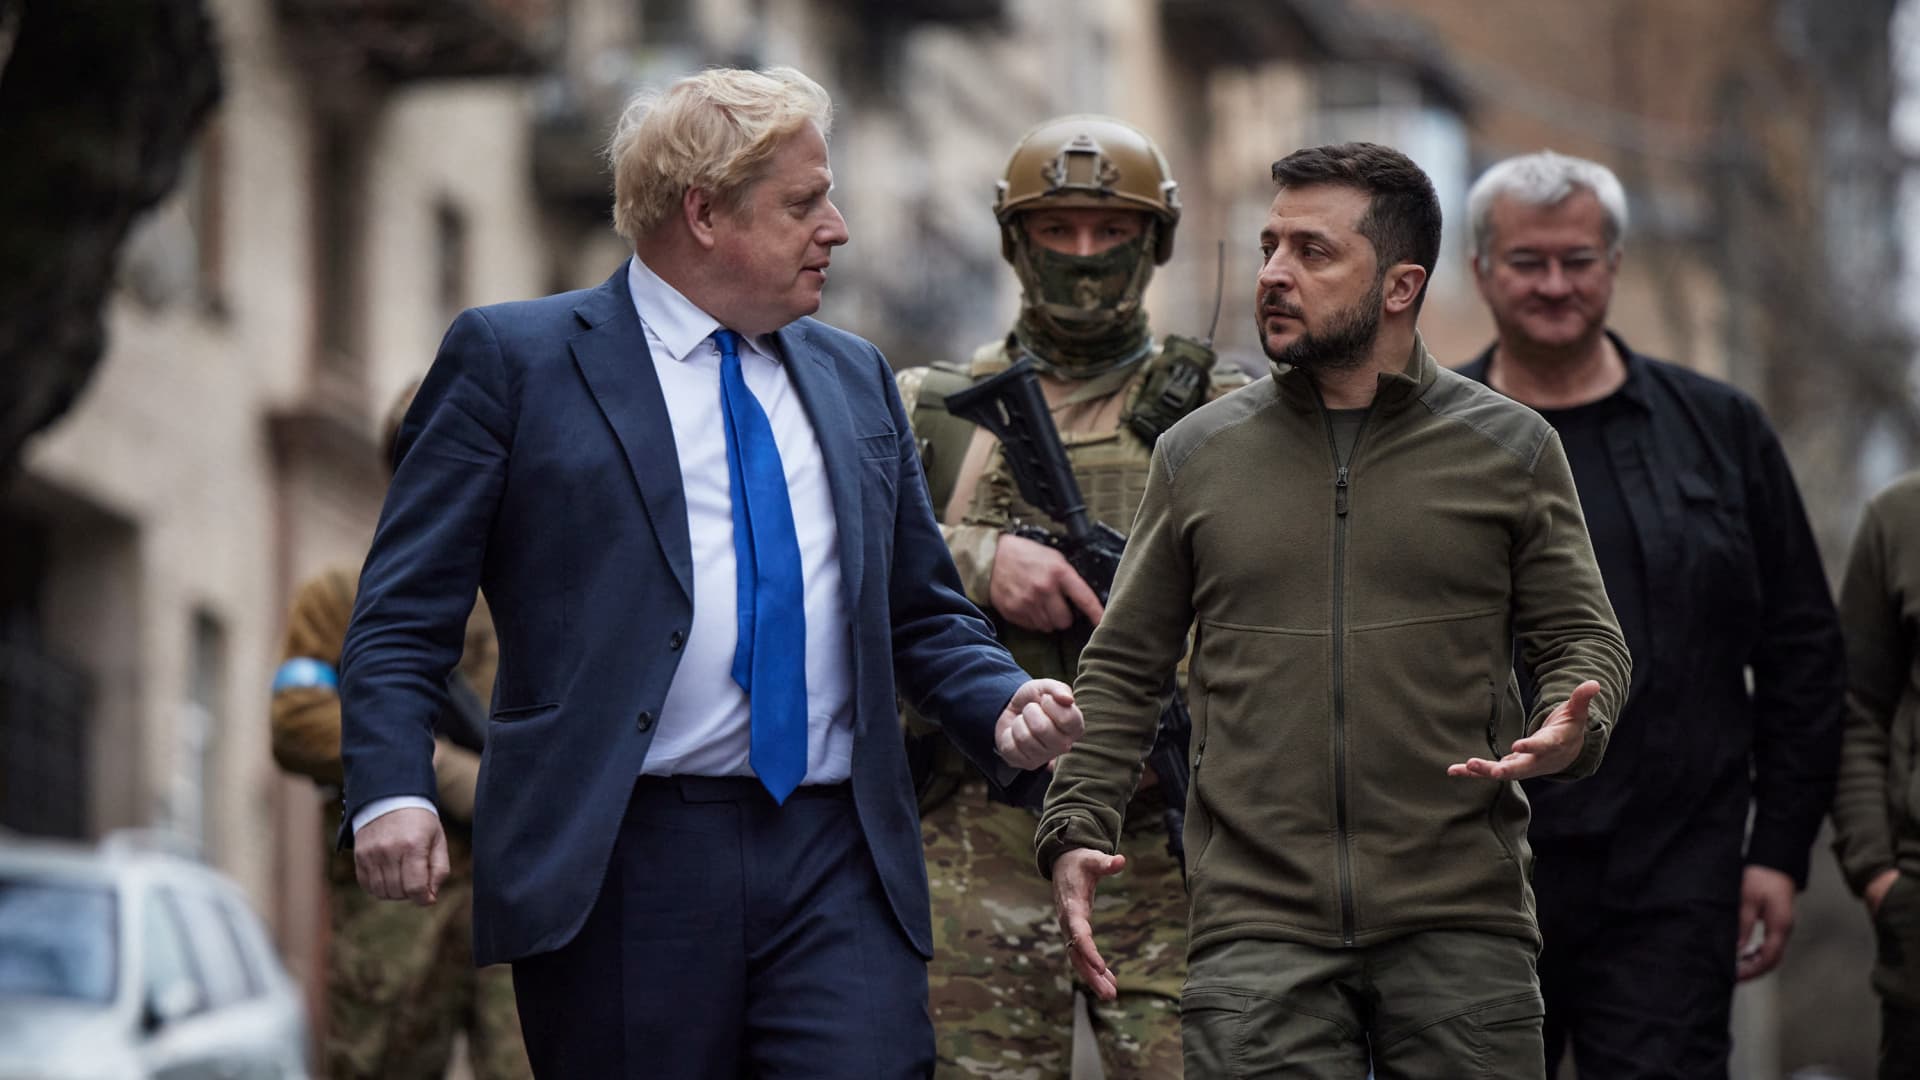 Boris Johnson vows more military aid to Ukraine warns Putin will intensify pressure in the east – CNBC